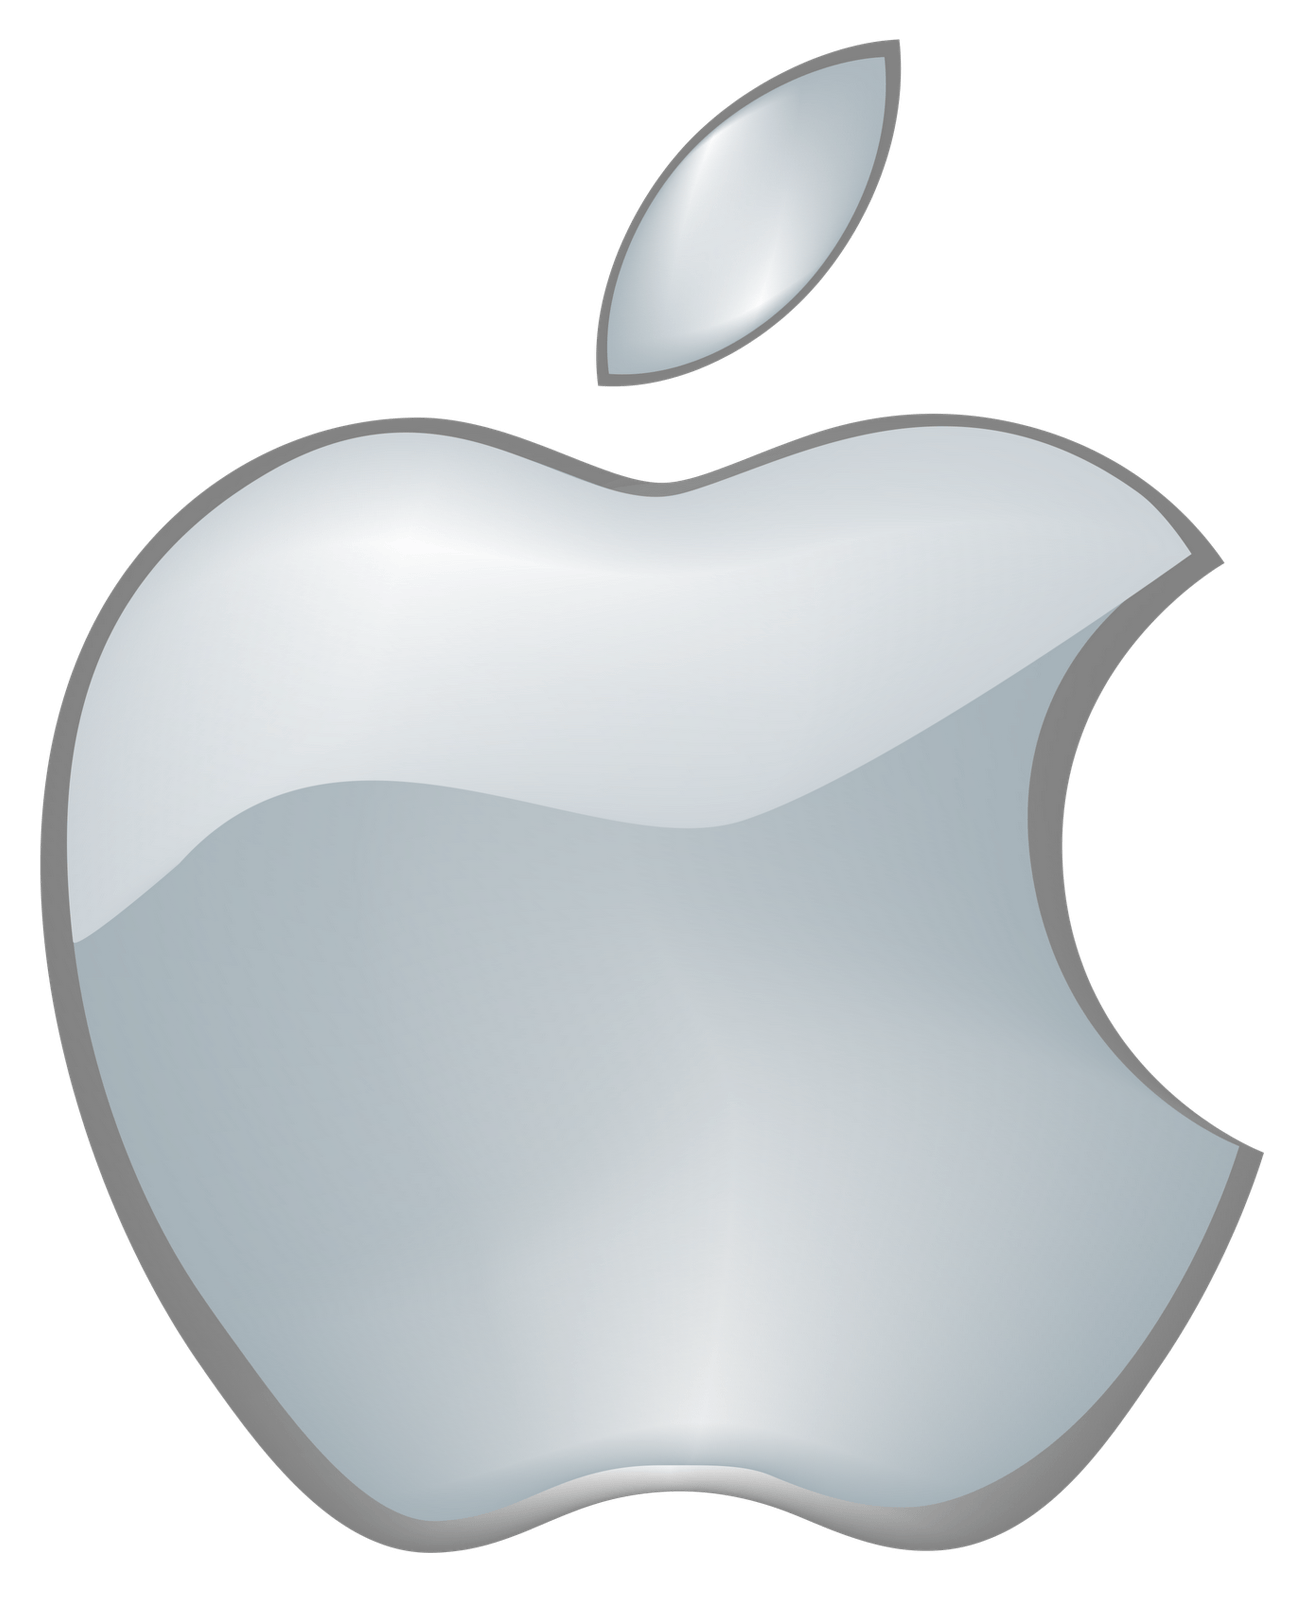 New Apple Computers Logo - Apple logo PNG images free download